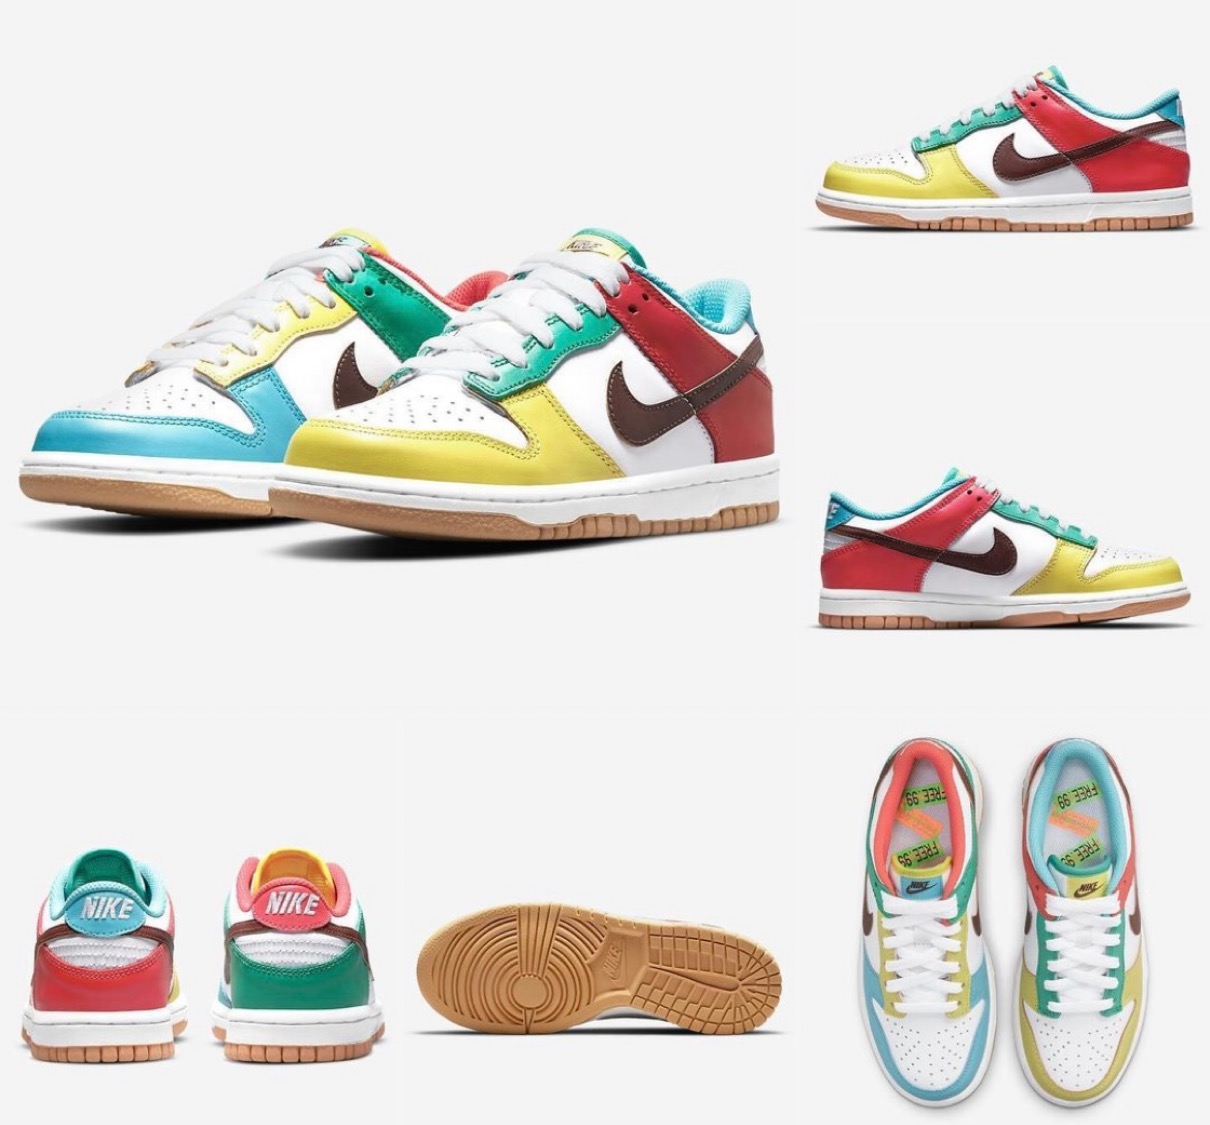 Nike】左右非対称なDunk Low SE “Free.99” Packが国内5月7日/5月26日に 